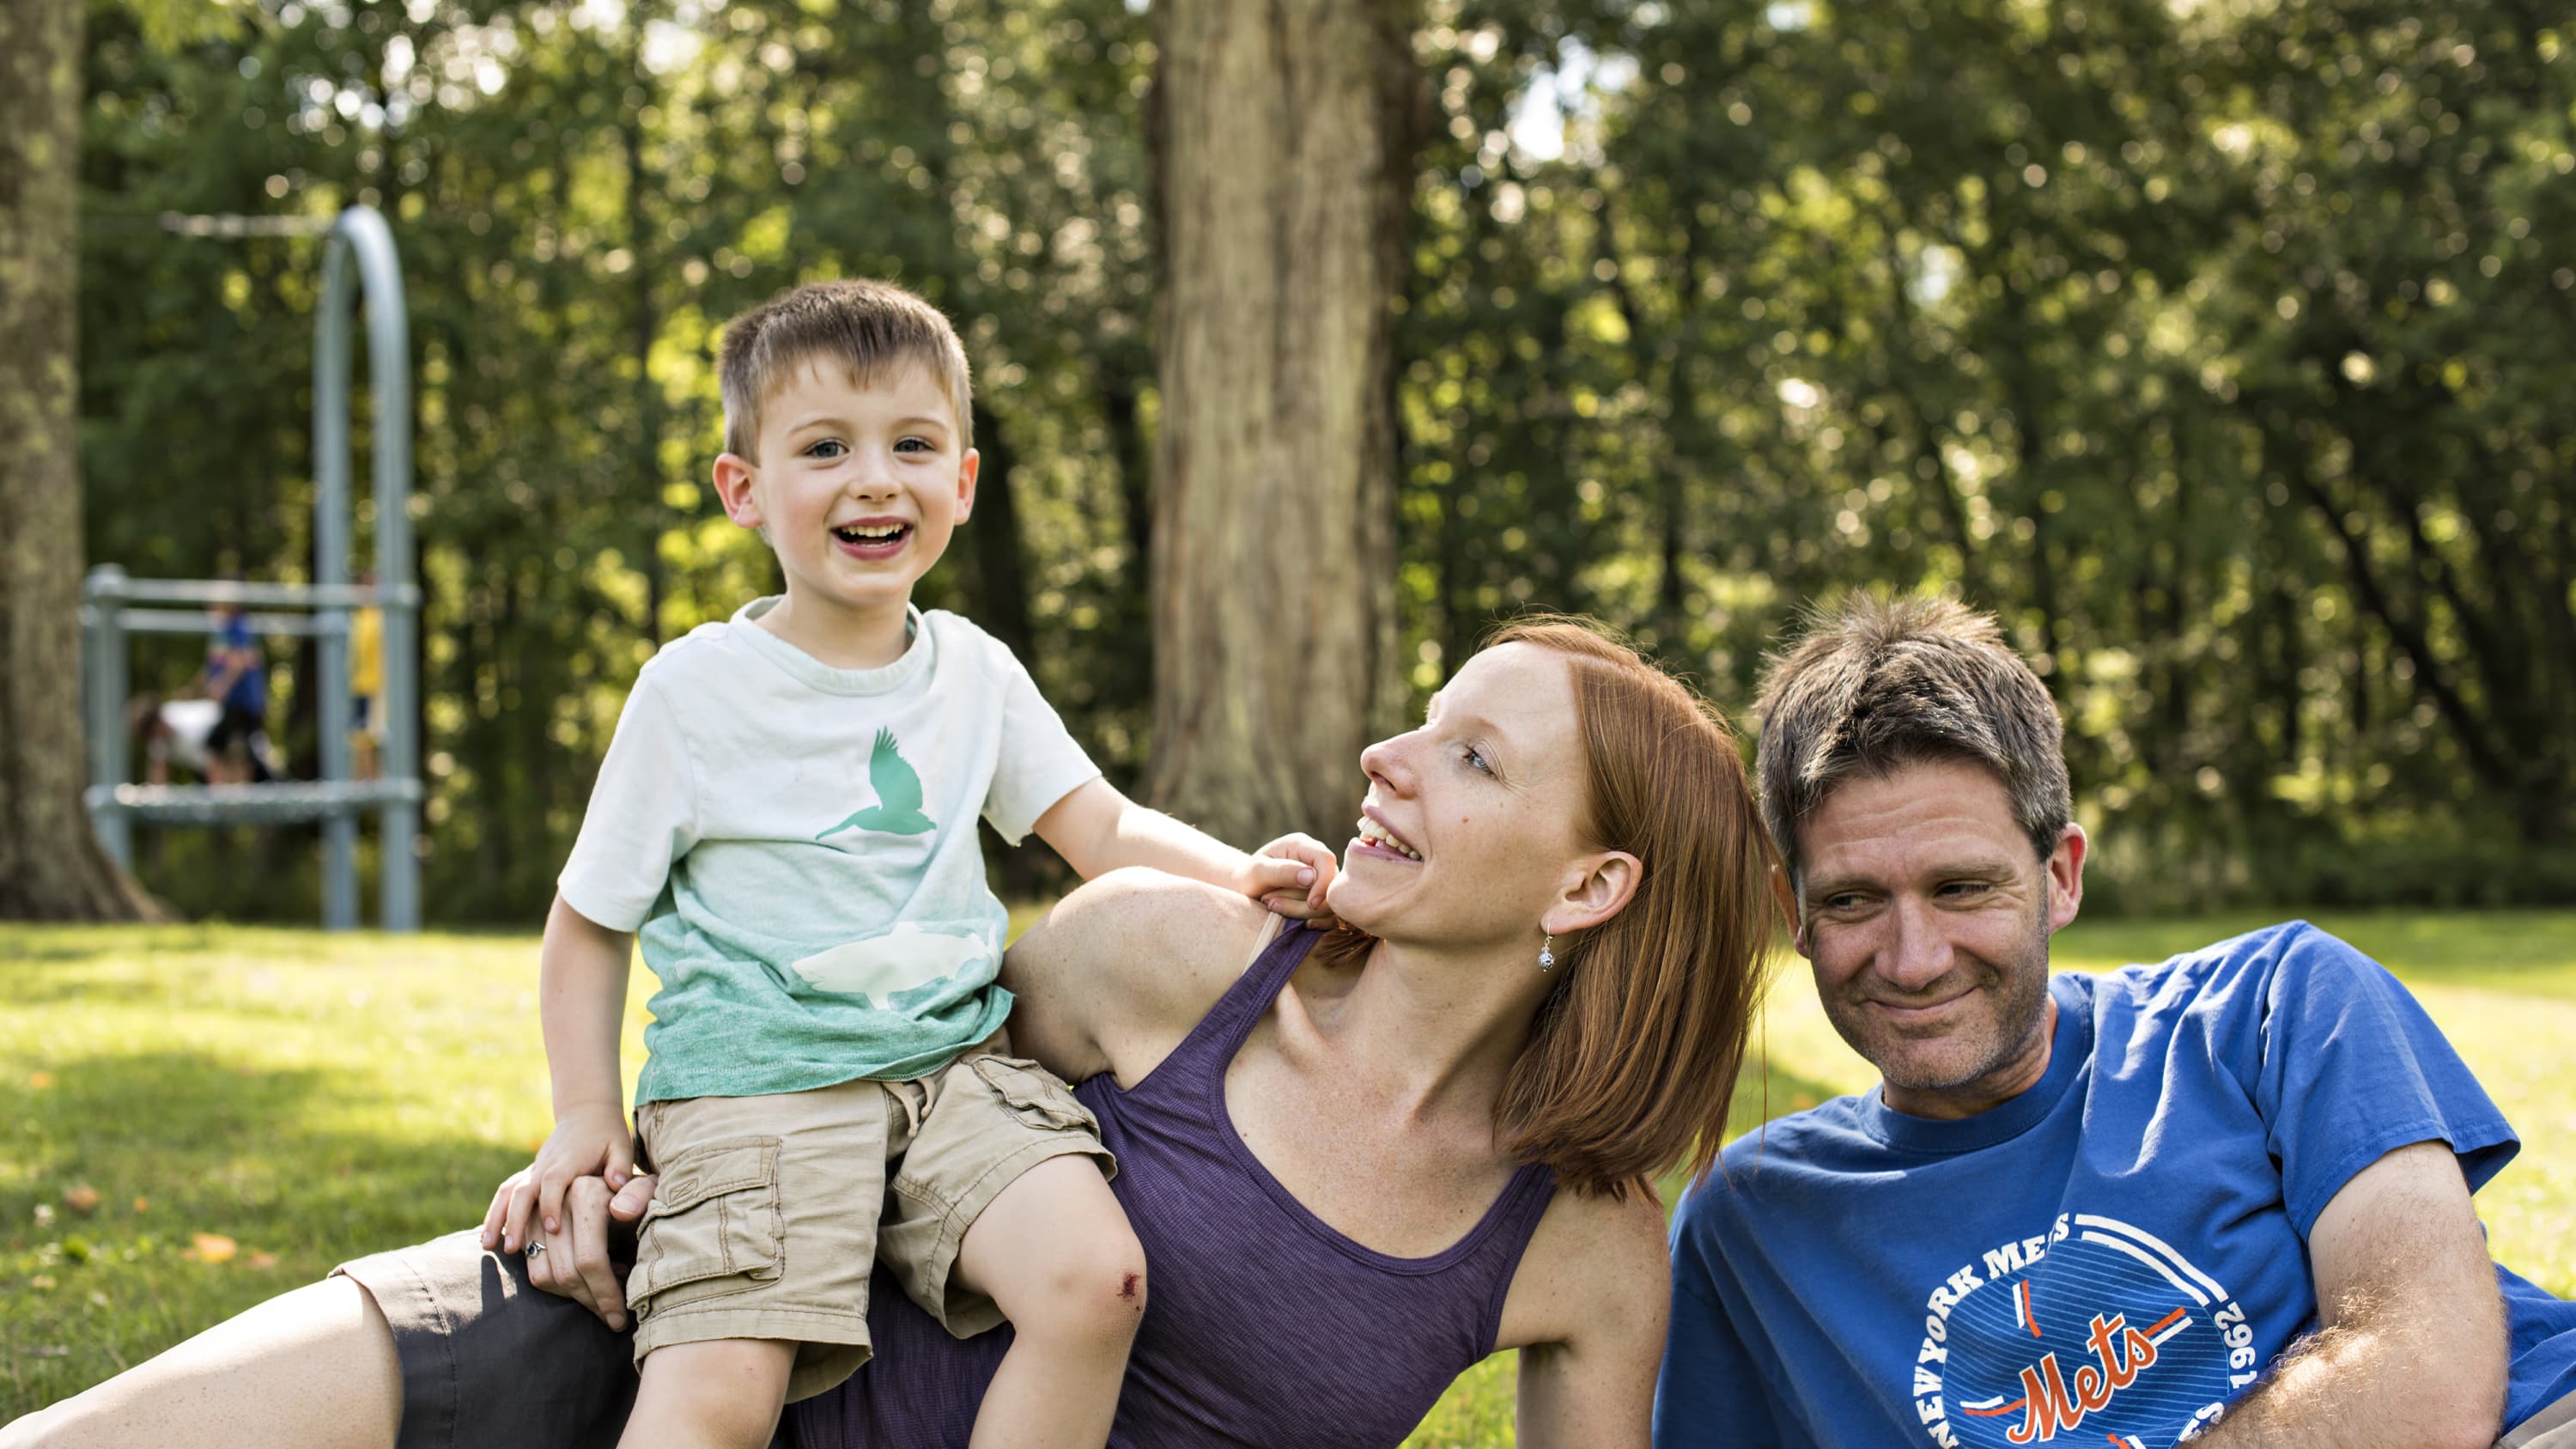 A young boy, Zachary Bailey, poses in a park with his parents, Carrie MacMillan and Hugh Bailey.